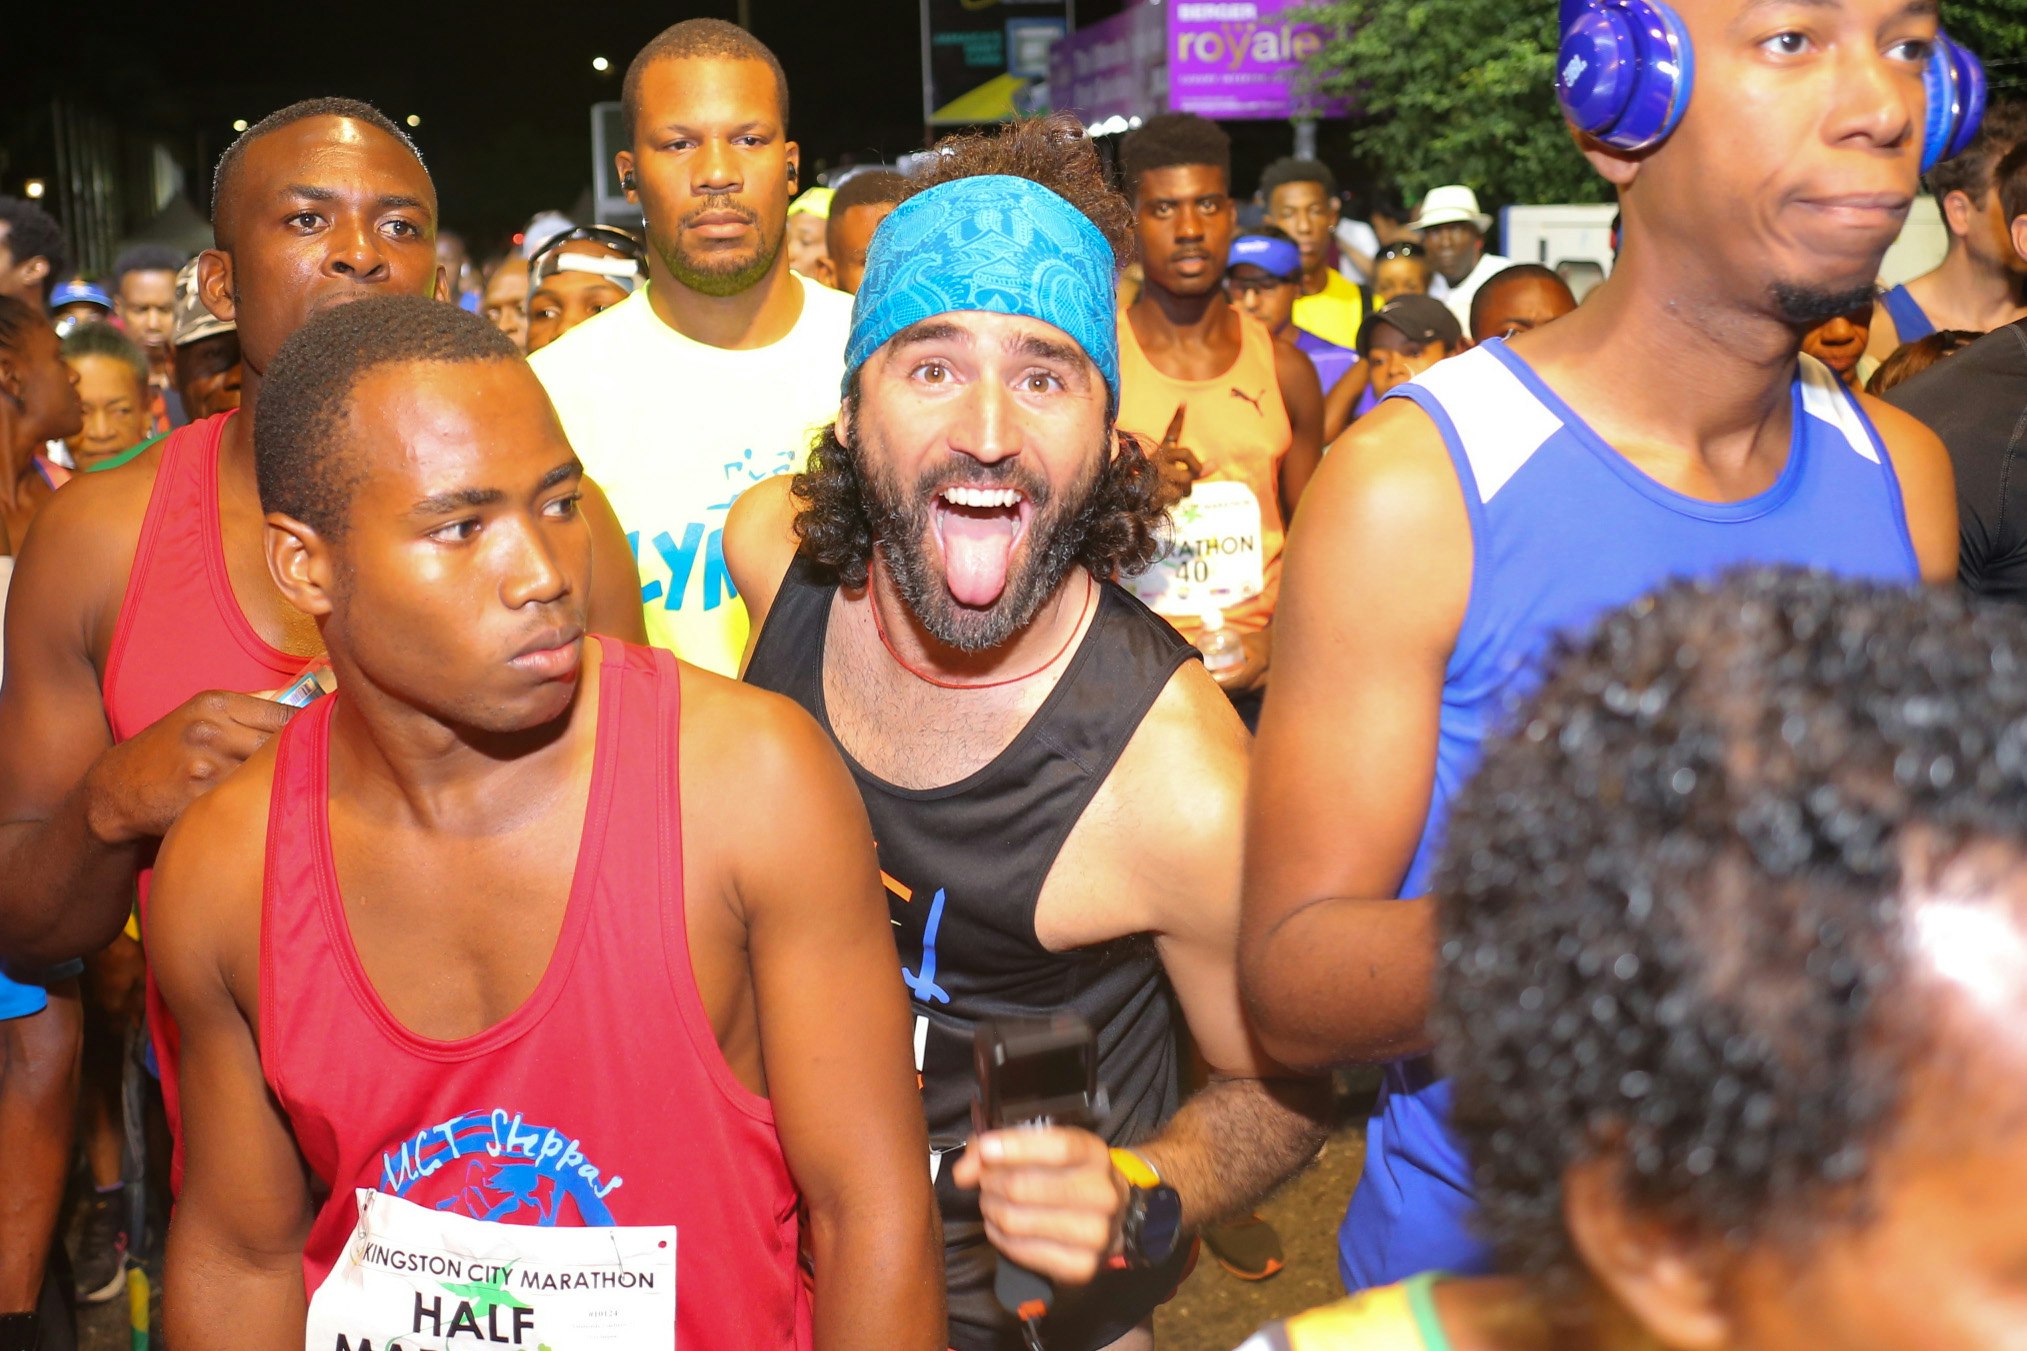 A crowd of runners standing in the flood lights at the start line of the marathon; one runner beams with excitement and his tongue hangs out from his wide-open smile